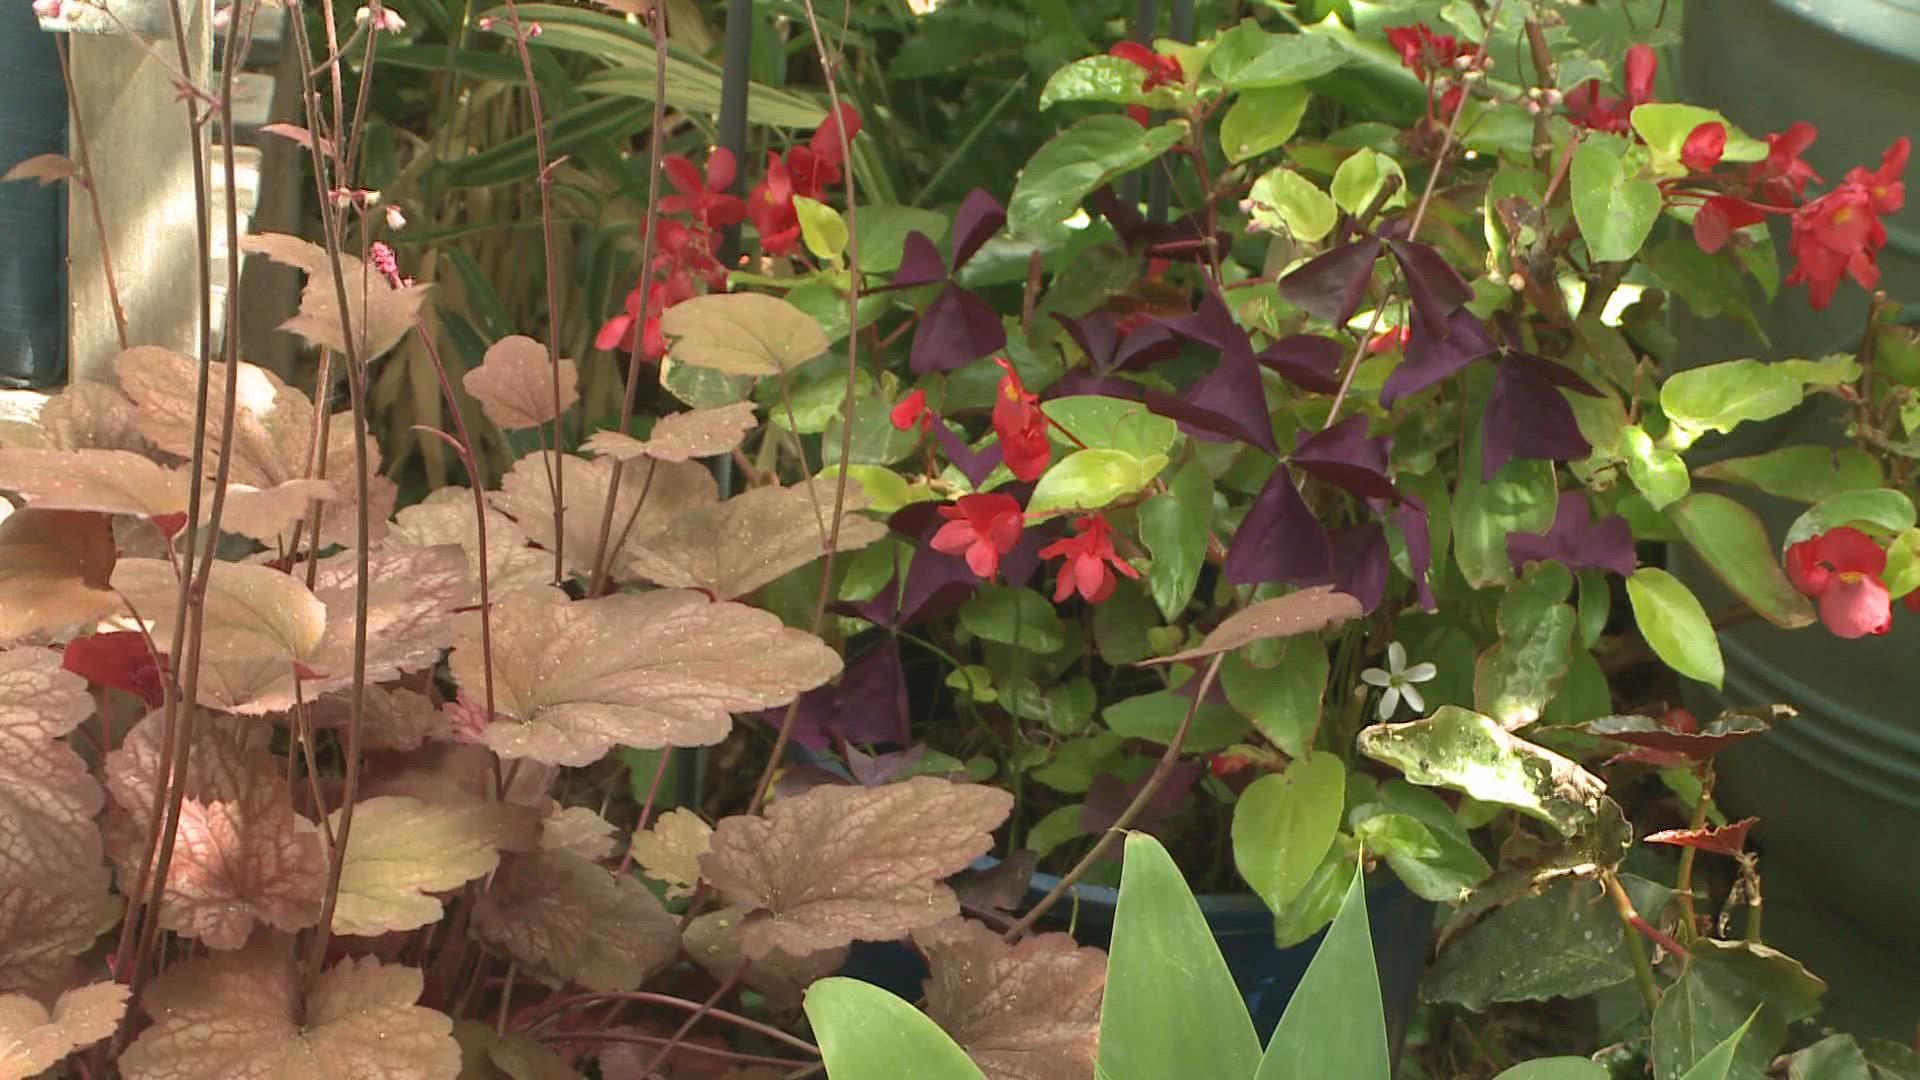 In this week's segment of Proctor's Garden, he shows you the best way to grow a plant in a pot.